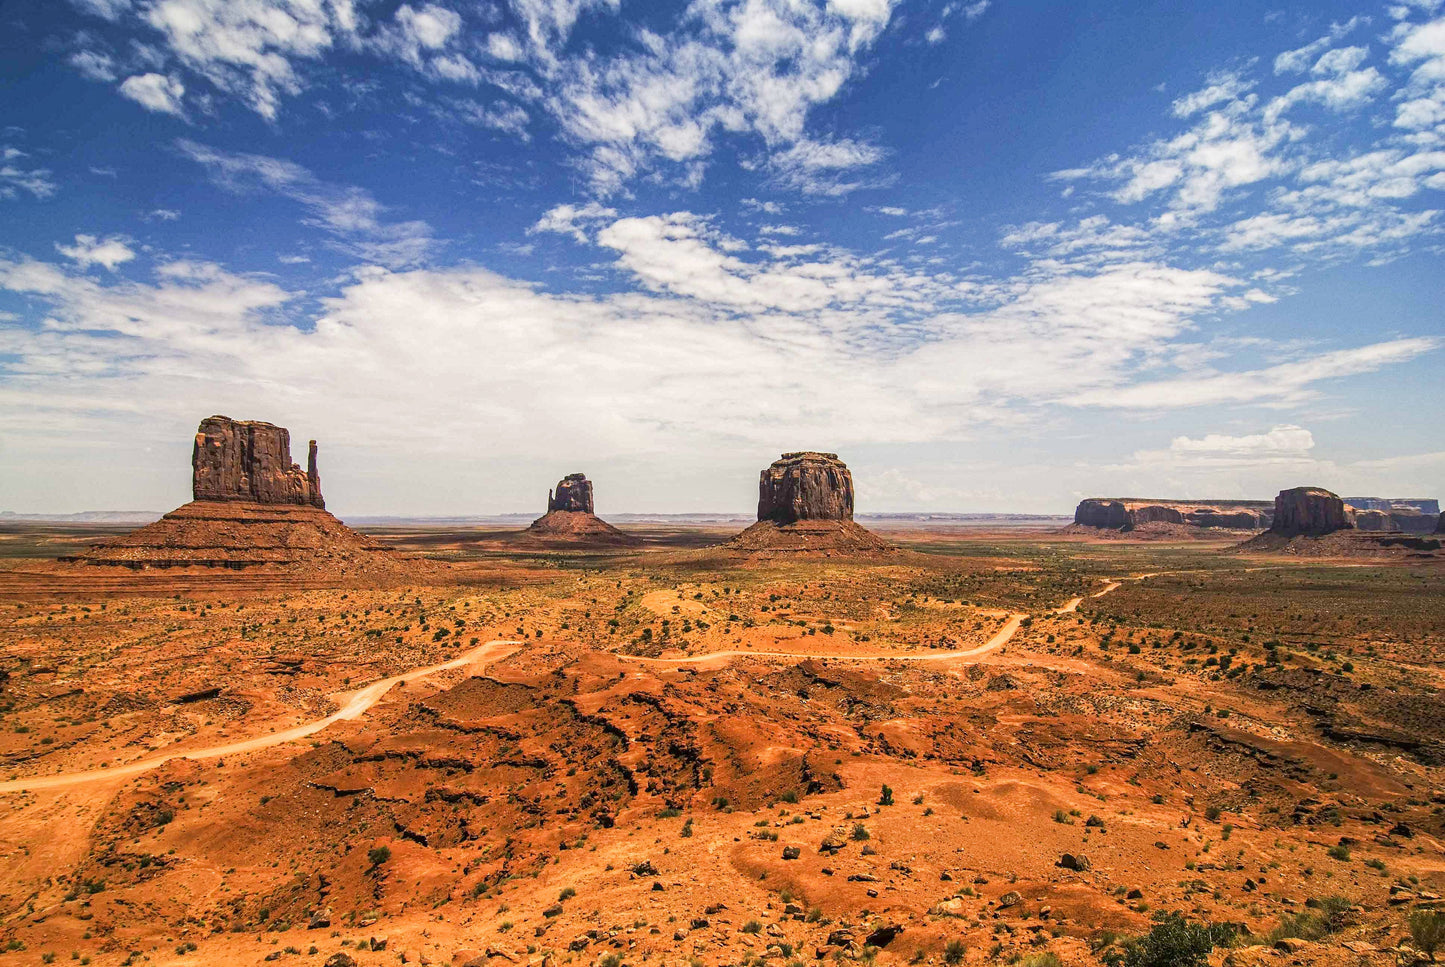 NUANCES OF ROCKS AND CLOUDS, Monument Valley, Arizona